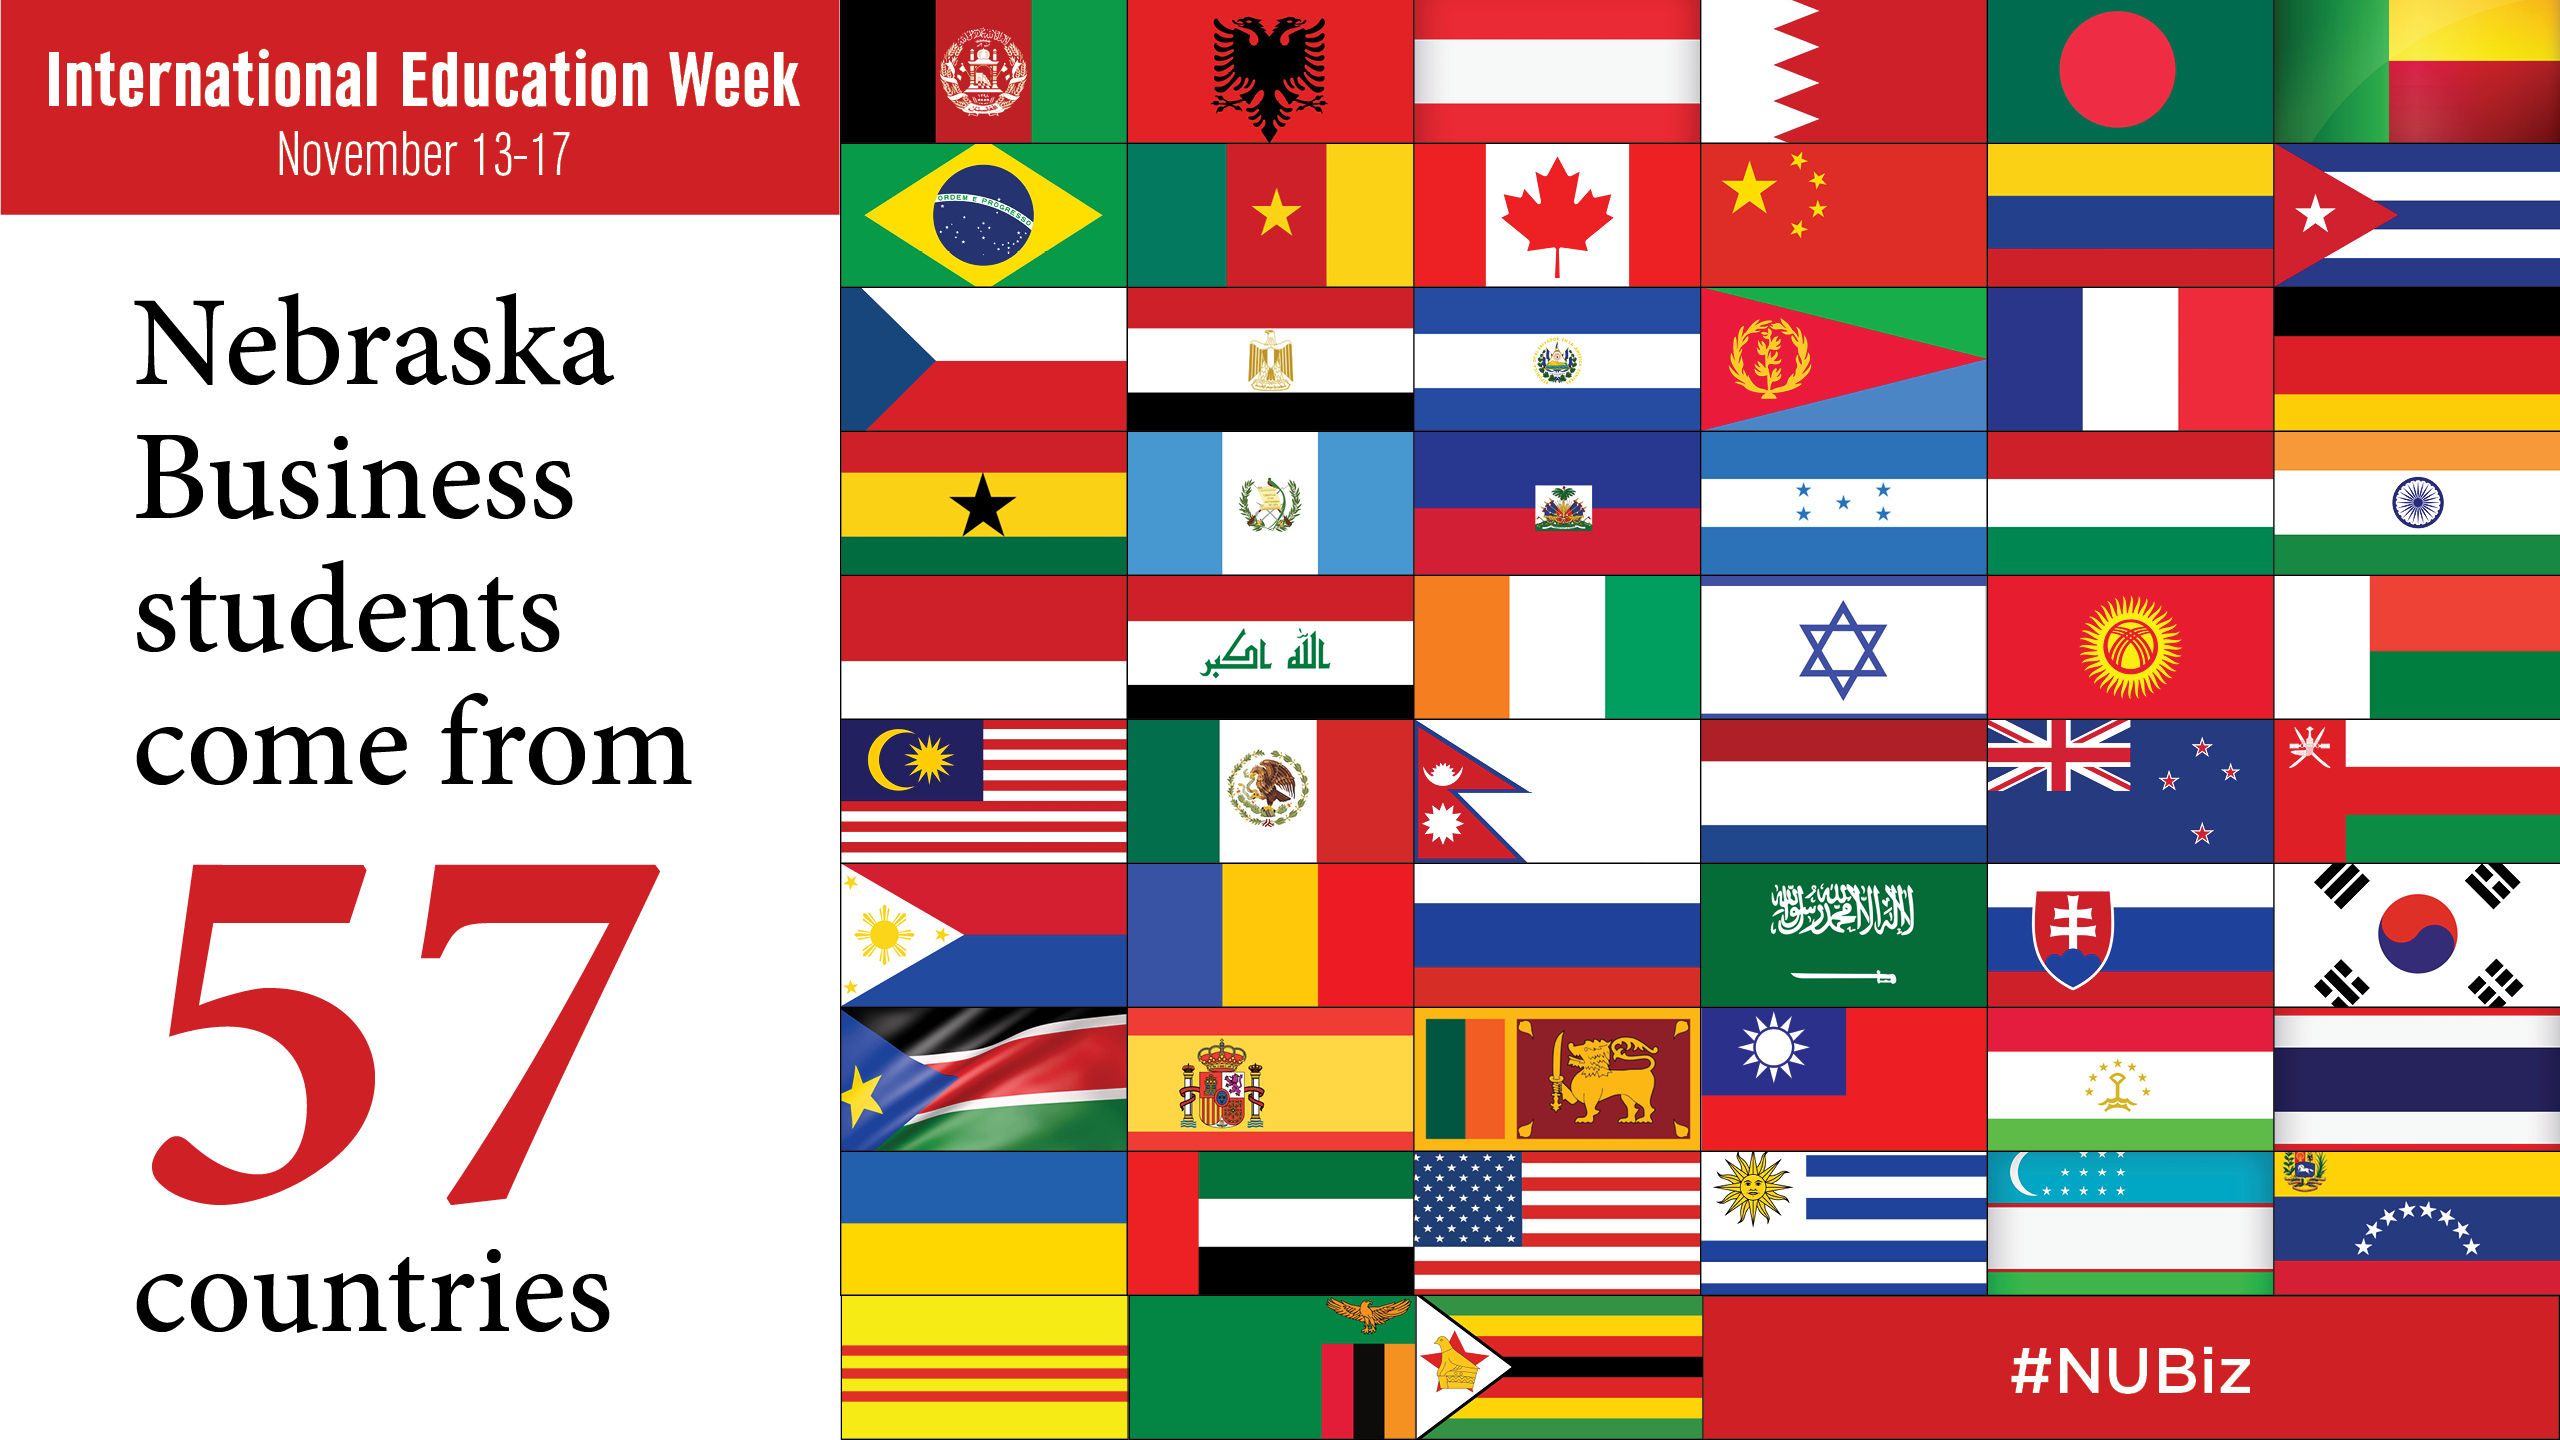 Celebrate International Education Week with the College of Business.